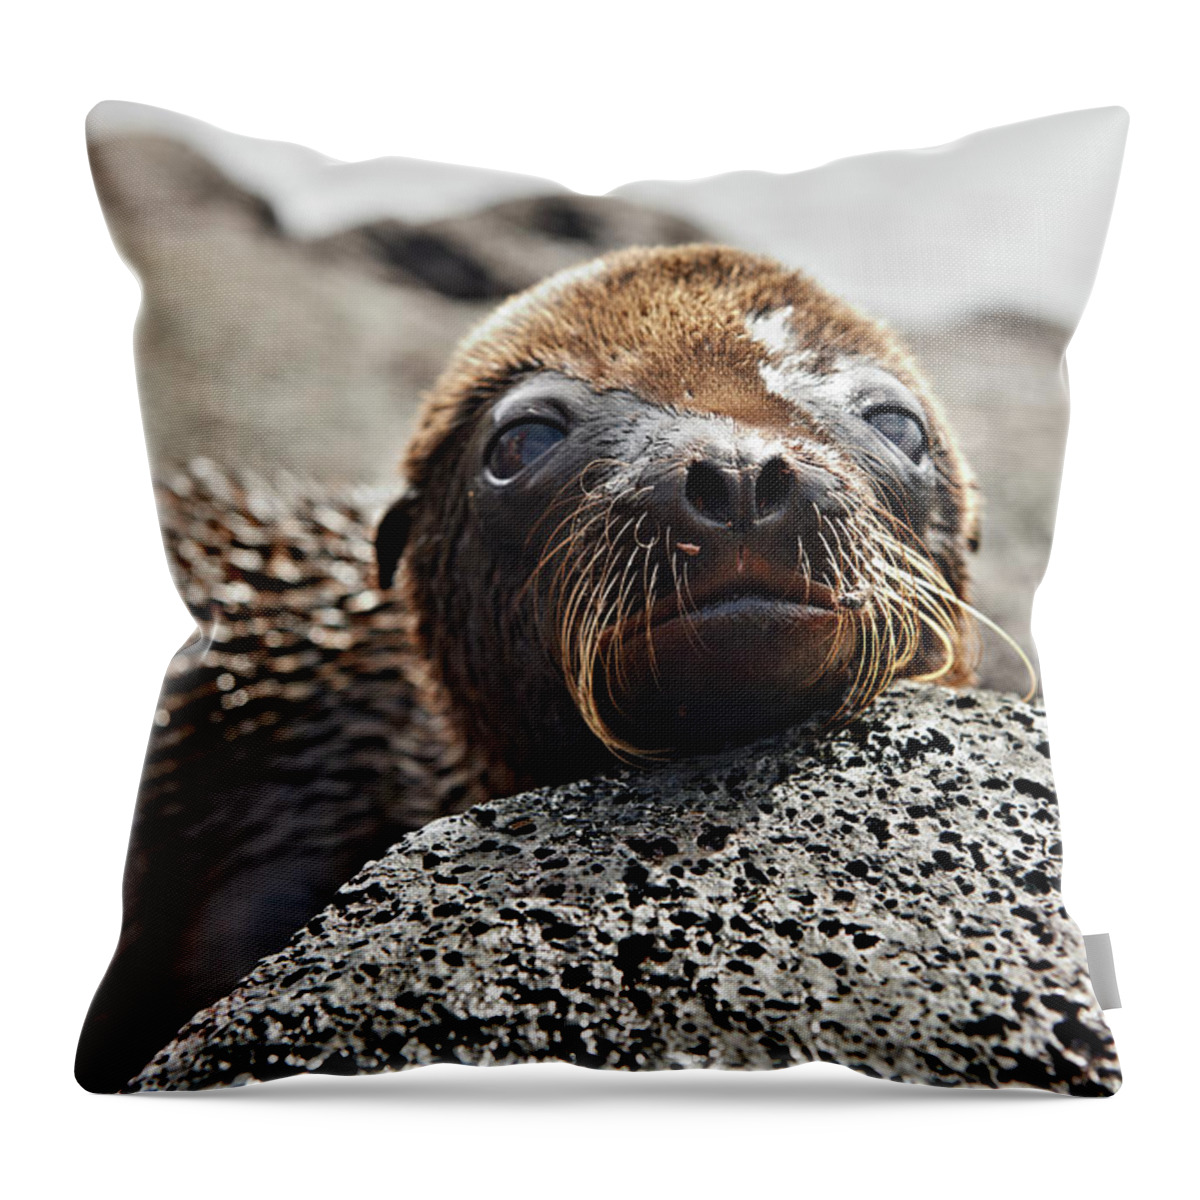 Galapagos Sea Lion Throw Pillow featuring the photograph Young Galapagos Sea Lion, Zalophus by Juergen Ritterbach